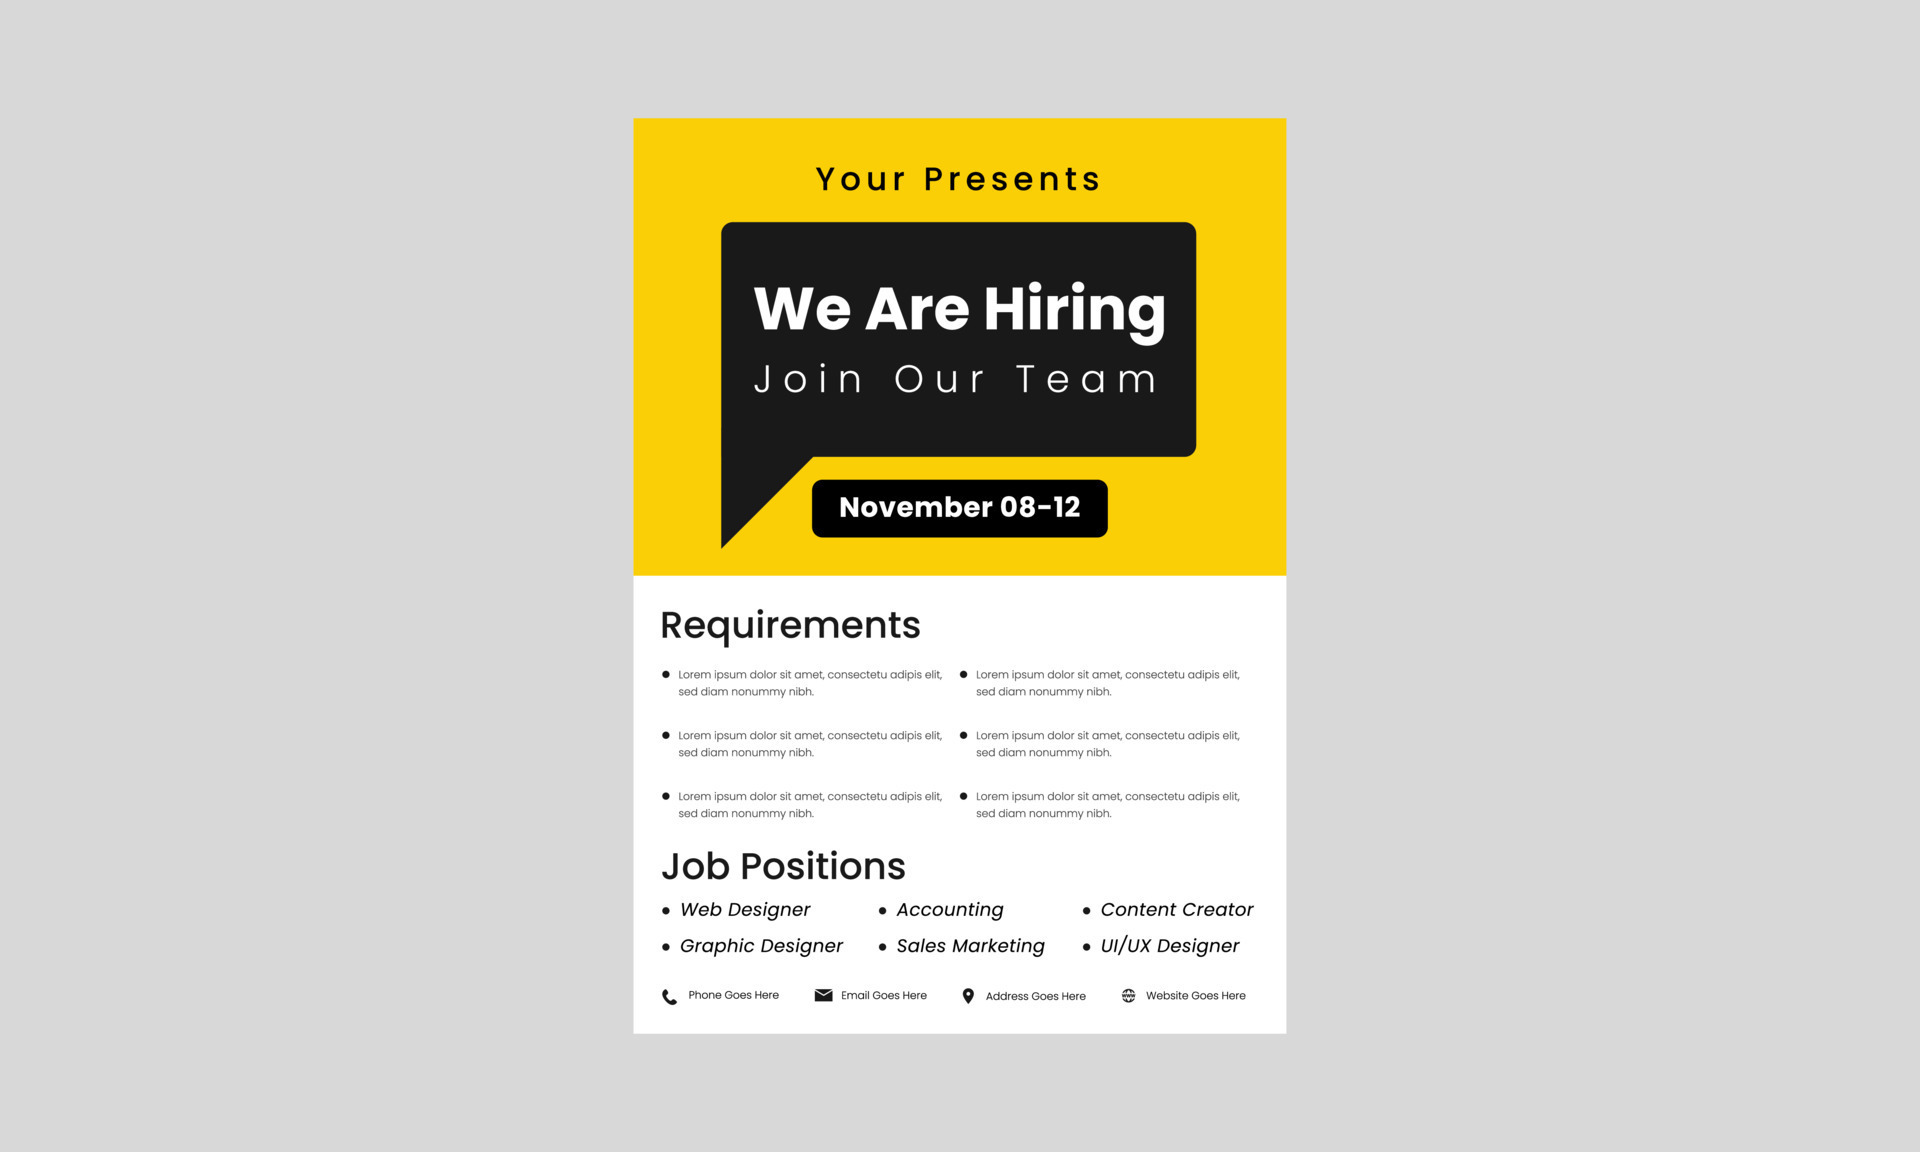 we are hiring join our team flyer design template. now we are ...